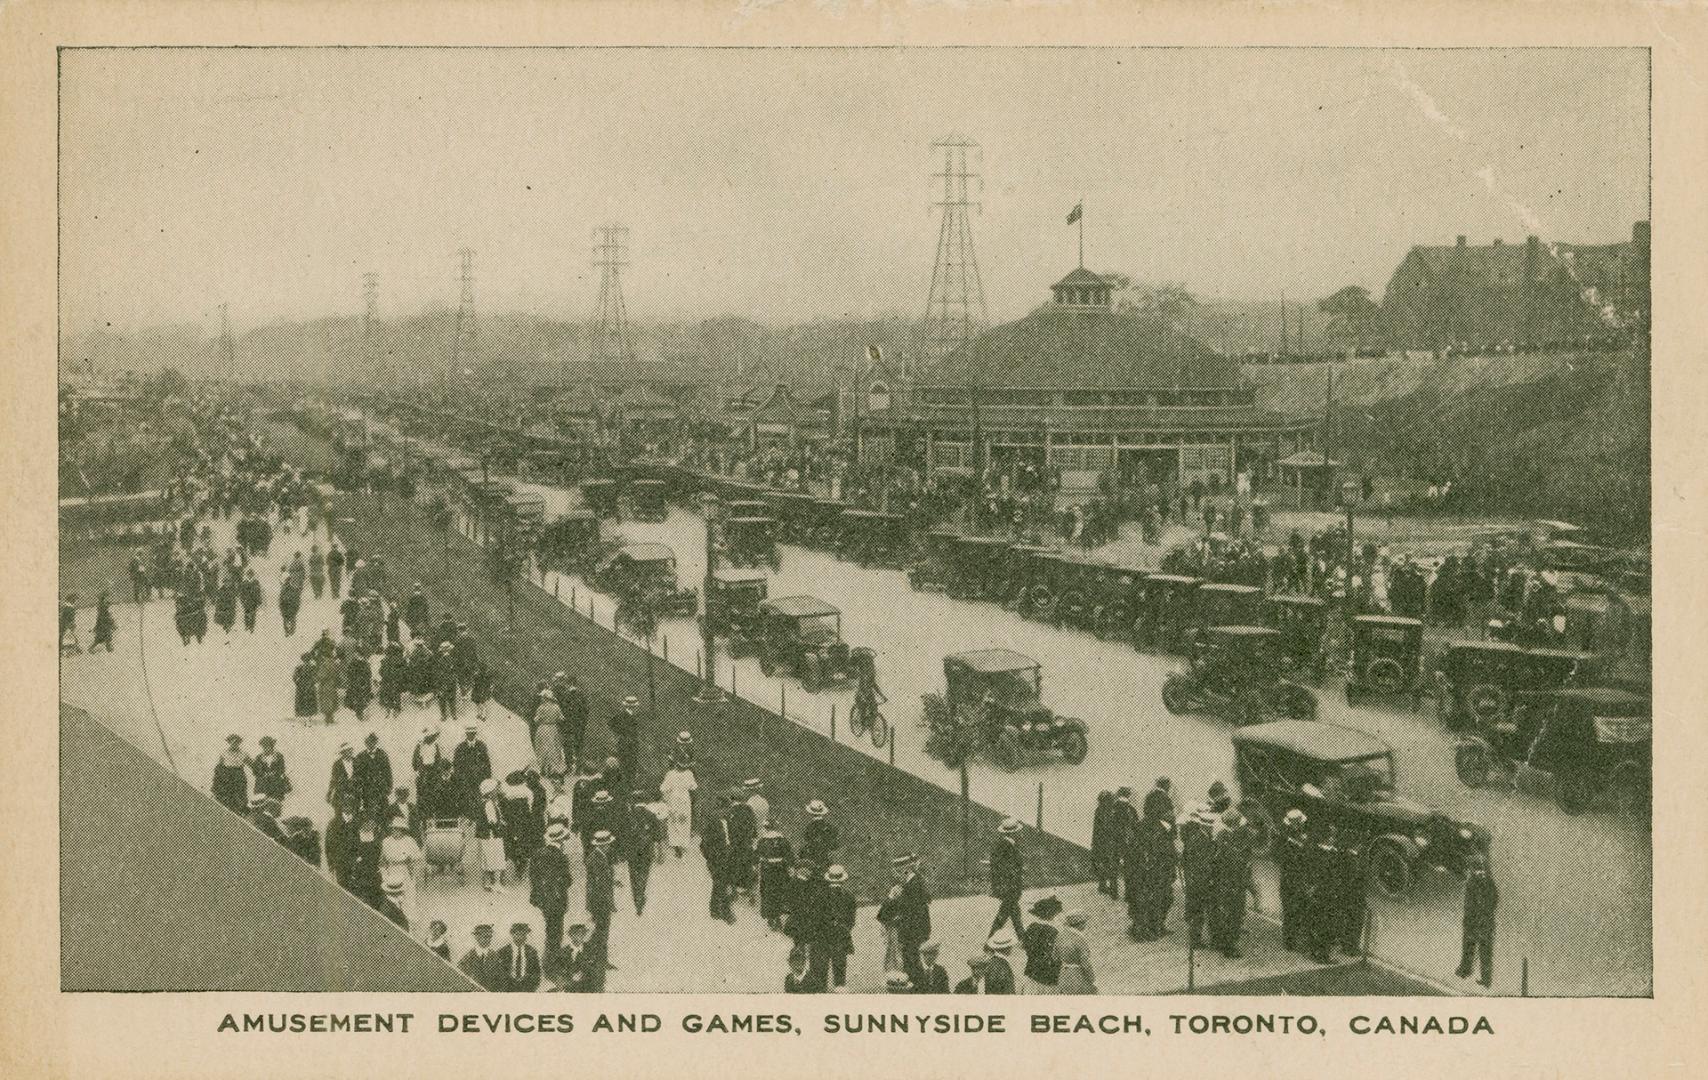 Picture of an amusement park with a road crowded with cars and people walking on a boardwalk. 